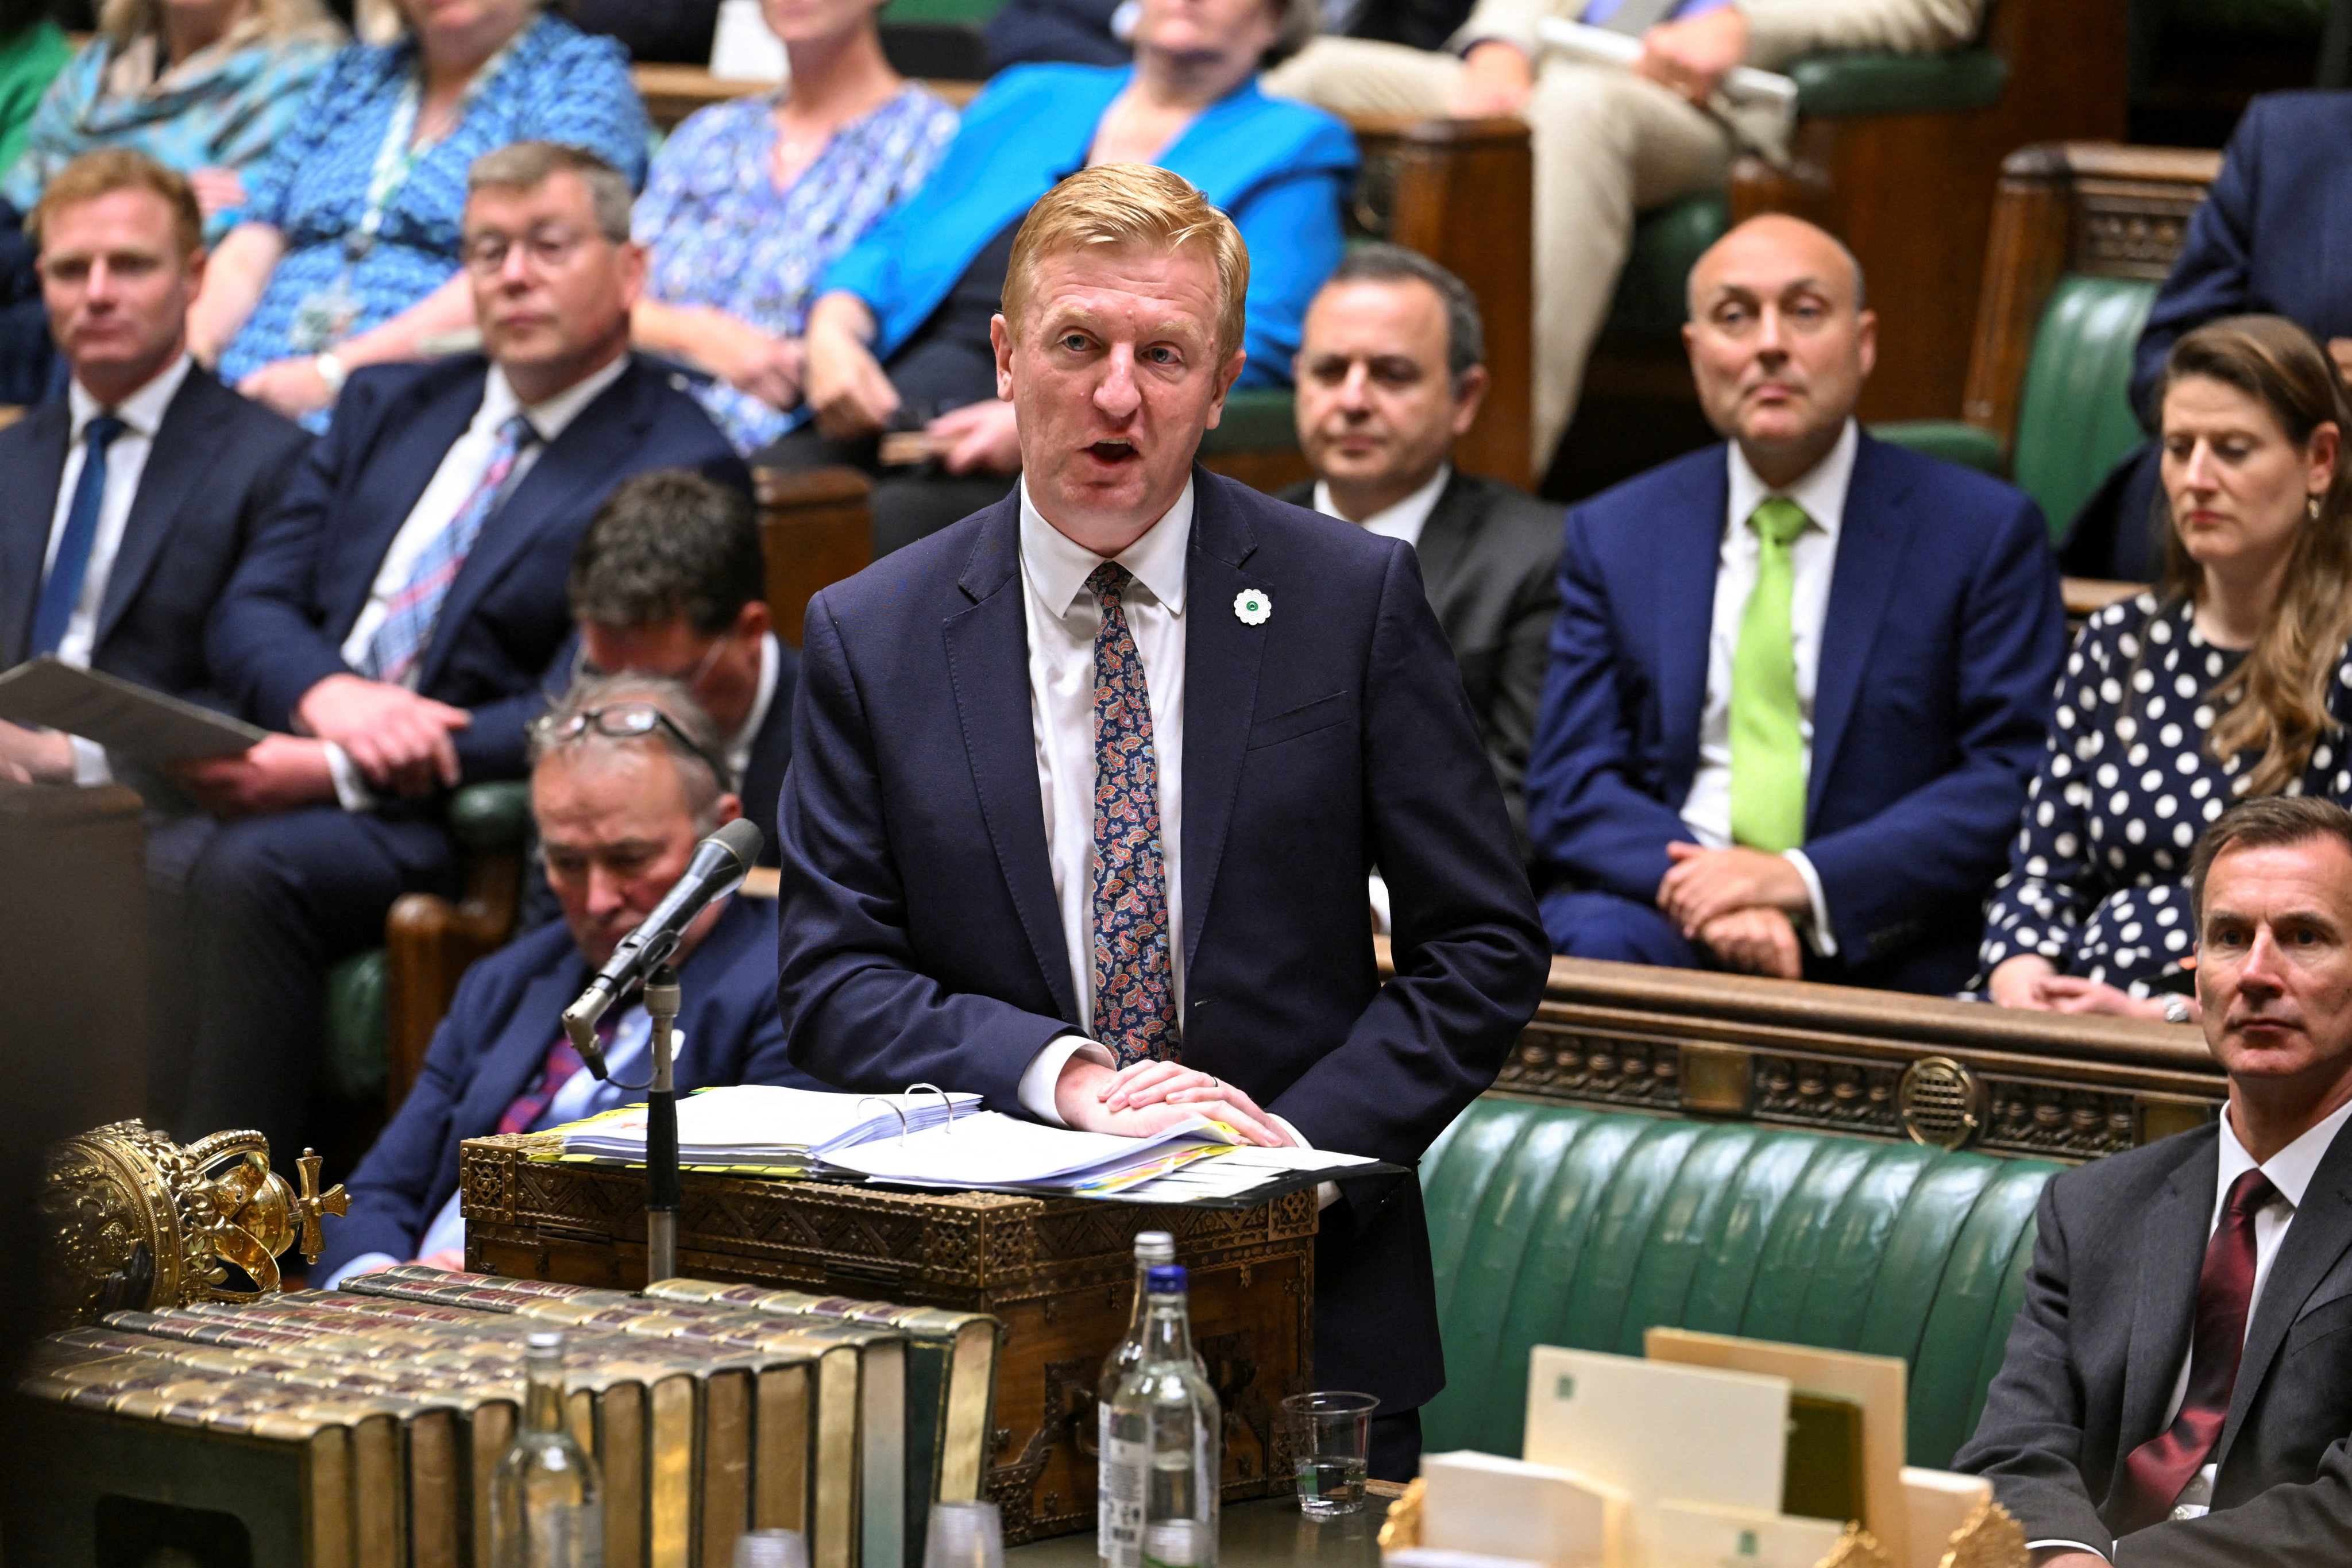 Britain’s deputy prime minister Oliver Dowden at Prime Minister’s Questions in London on Monday. Photo: UK Parliament / Jessica Taylor / Handout via Reuters